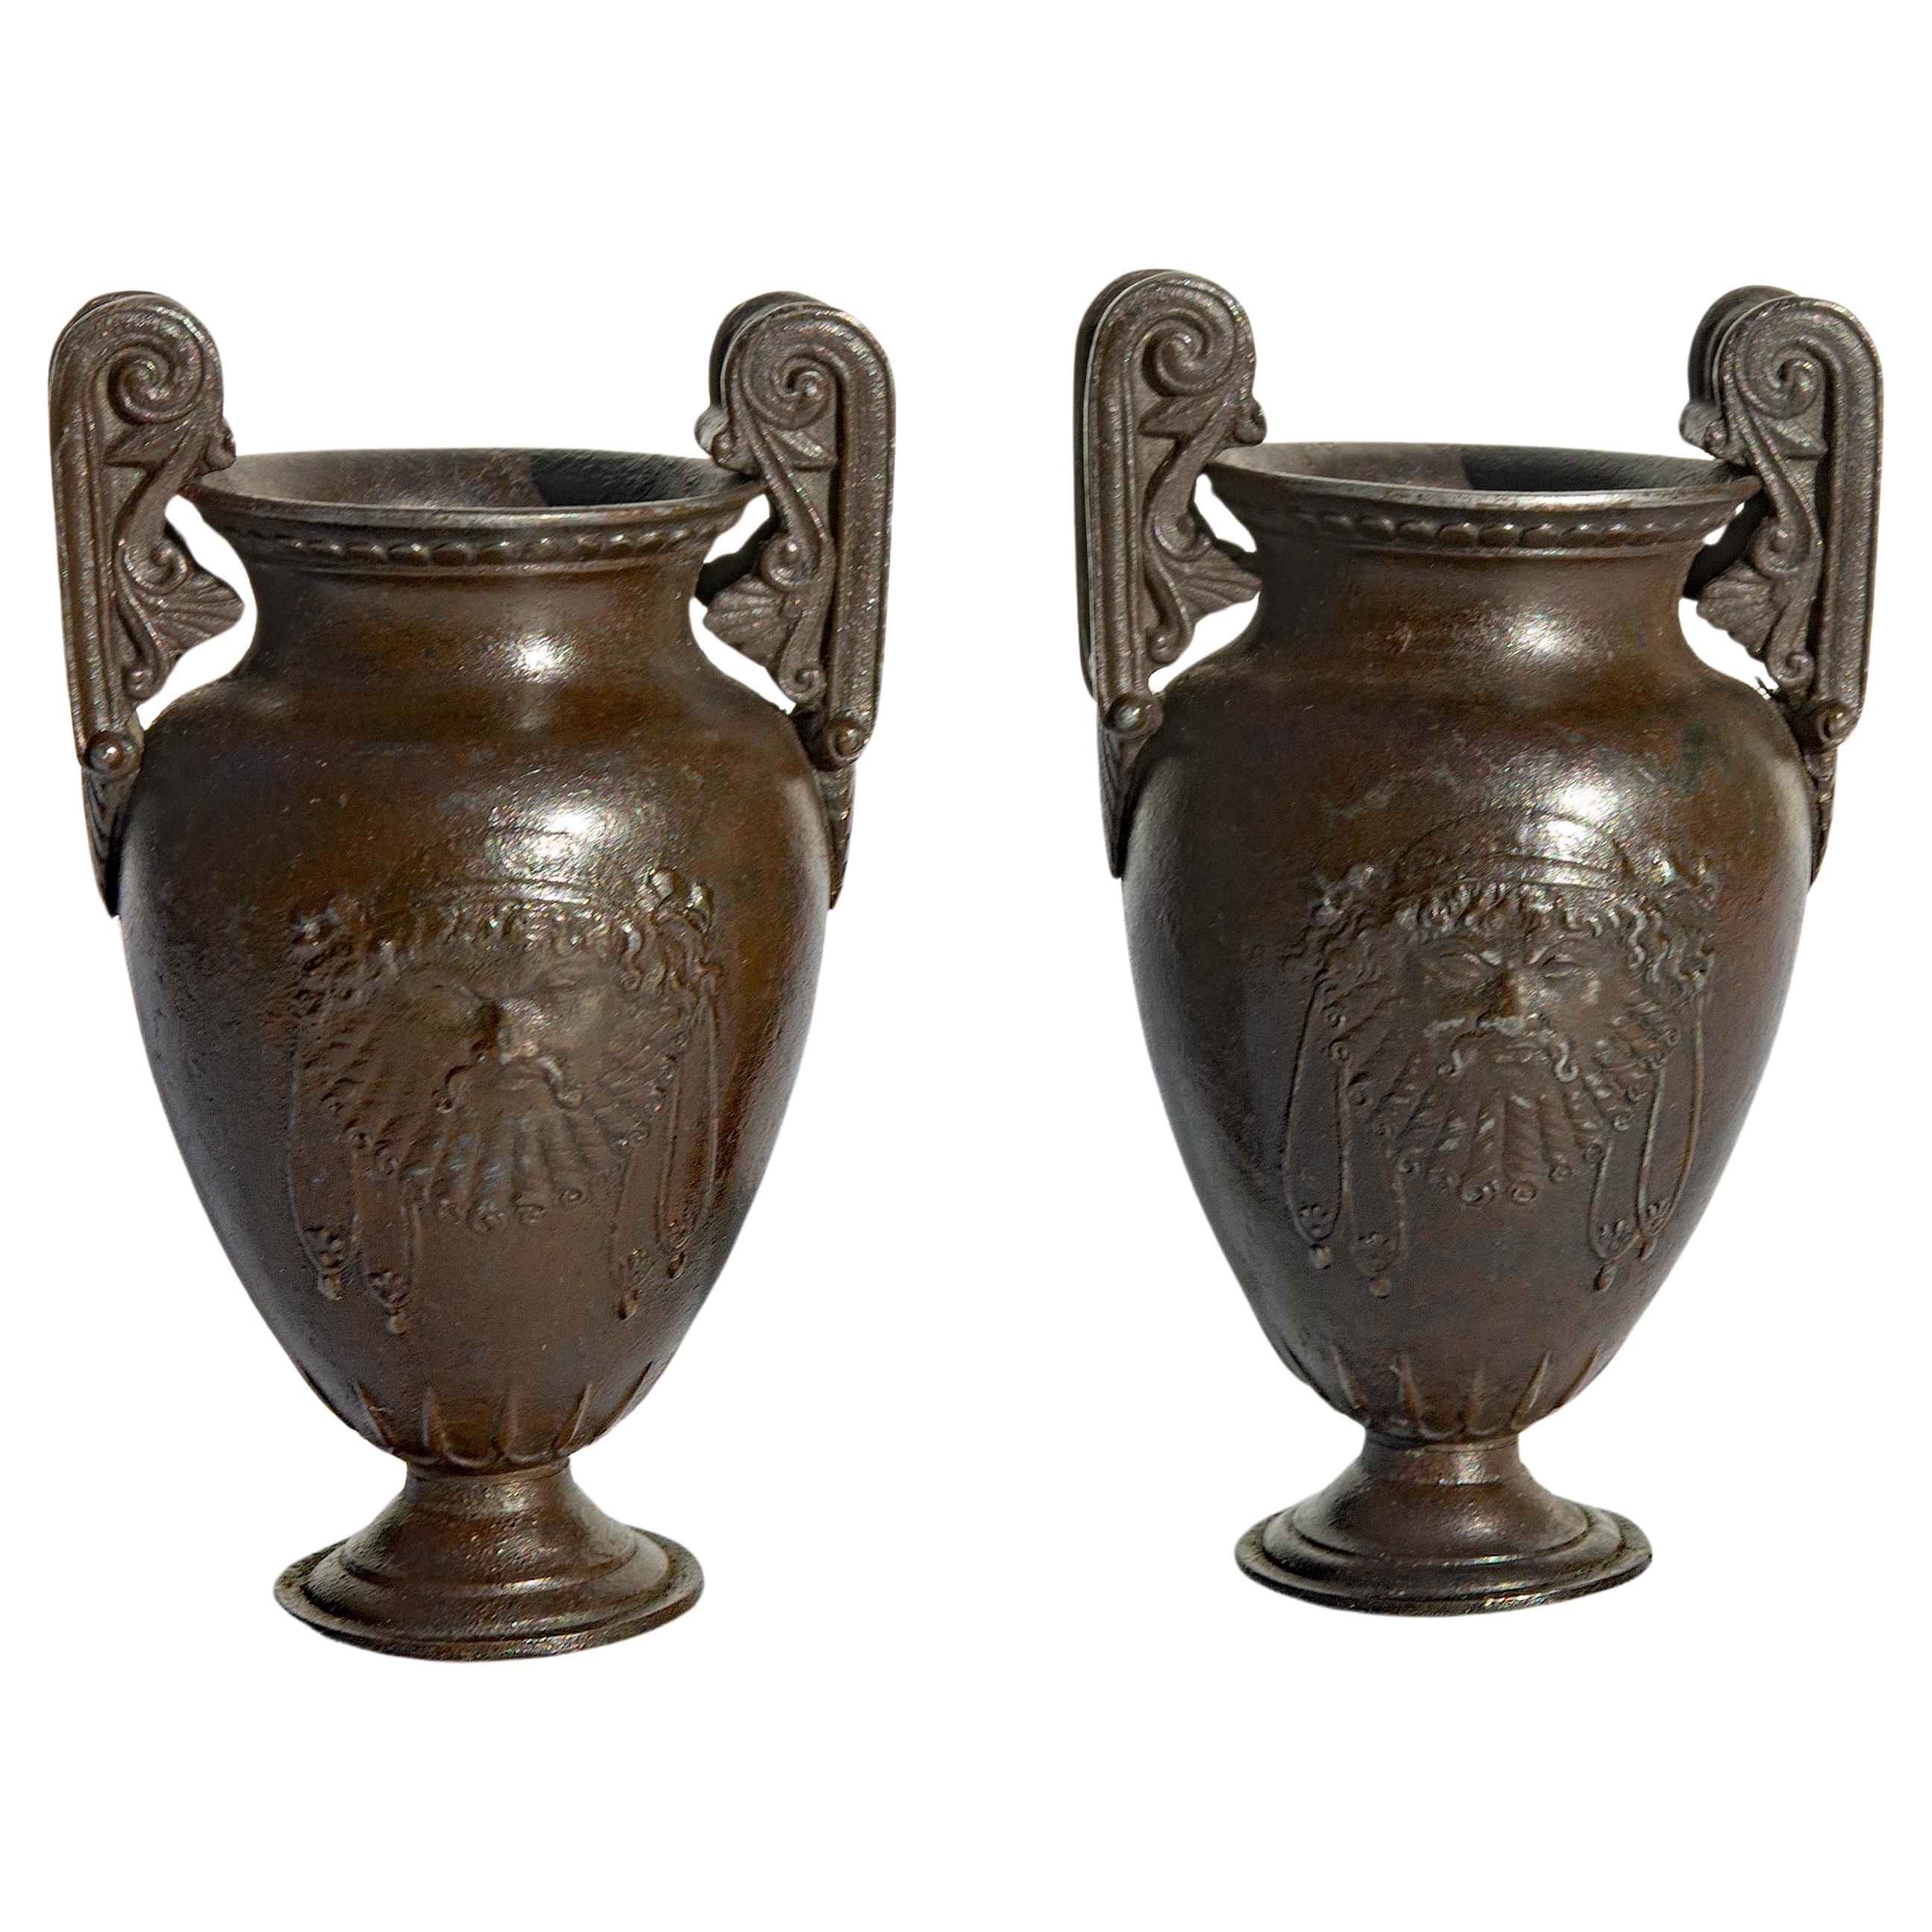 Pair of Cabinet Size Roman Classical Urns or Vases For Sale